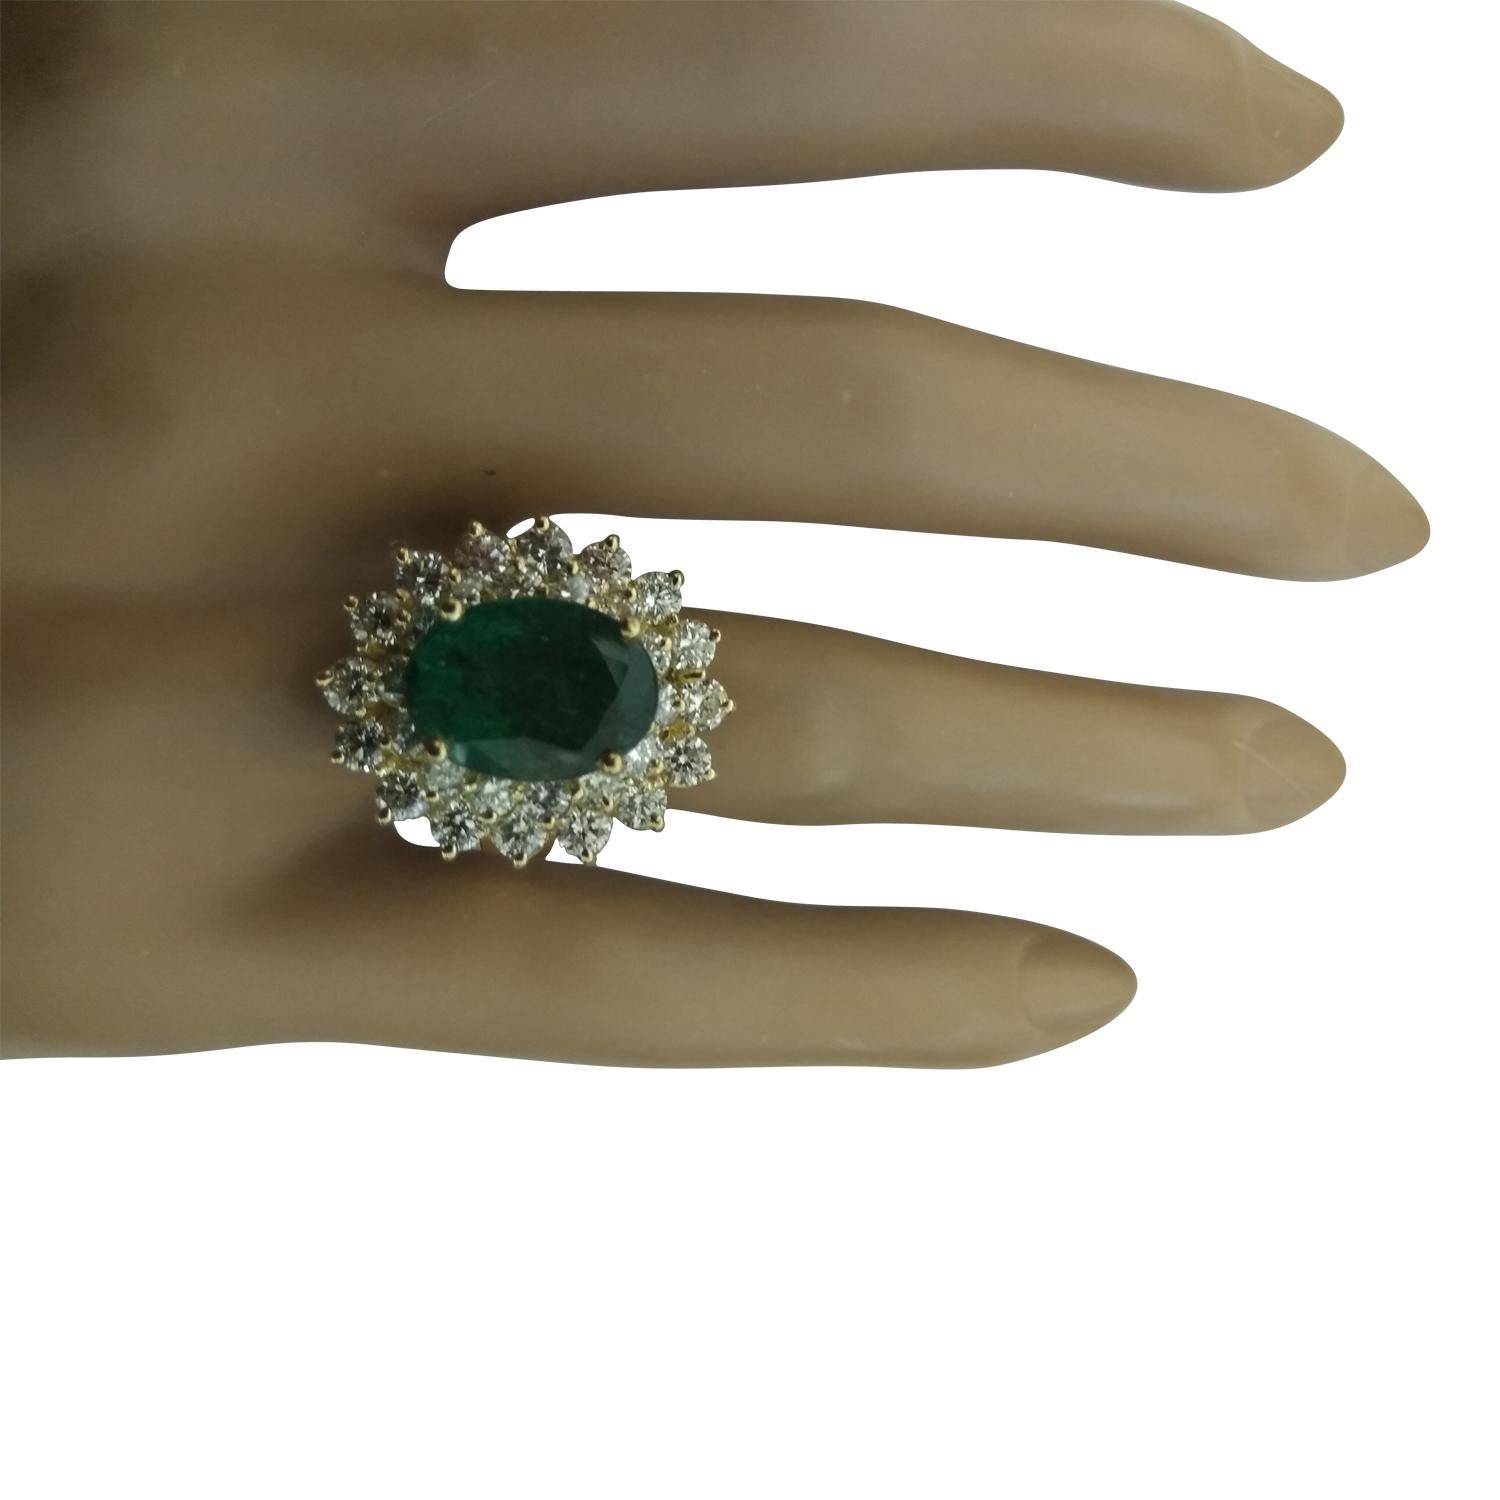 Oval Cut Natural Emerald Diamond Ring in 14 Karat Solid Yellow Gold  For Sale